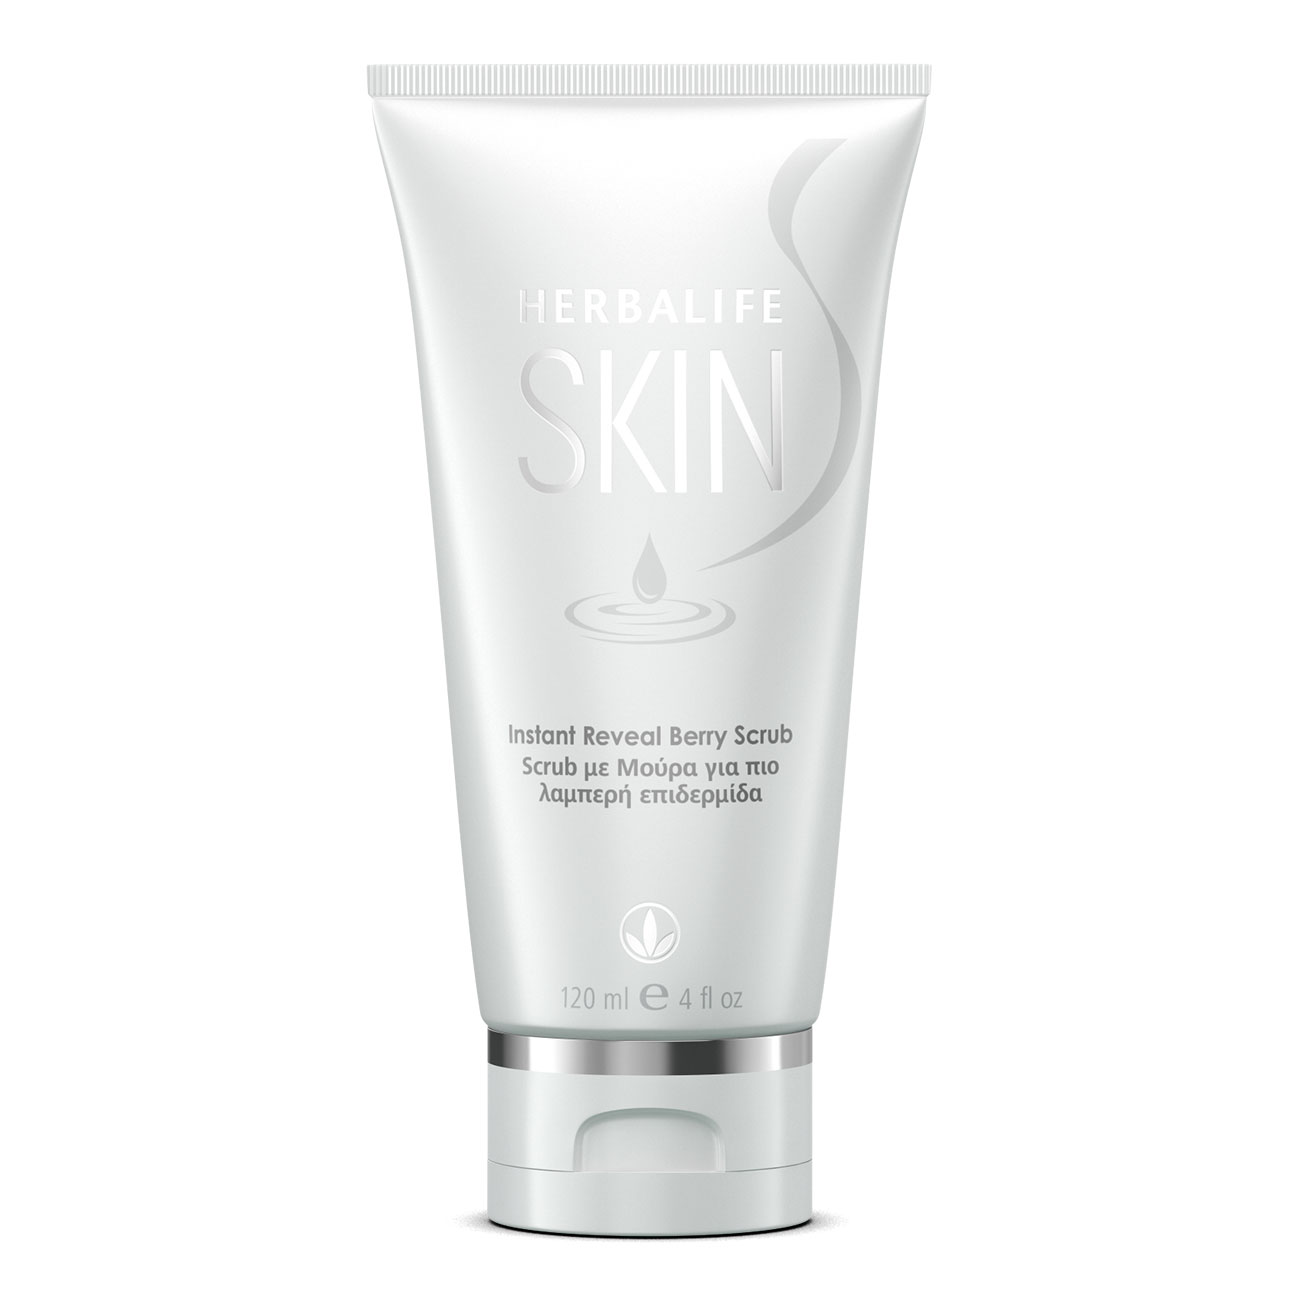 Herbalife SKIN Instant Reveal Berry Scrub  product shot